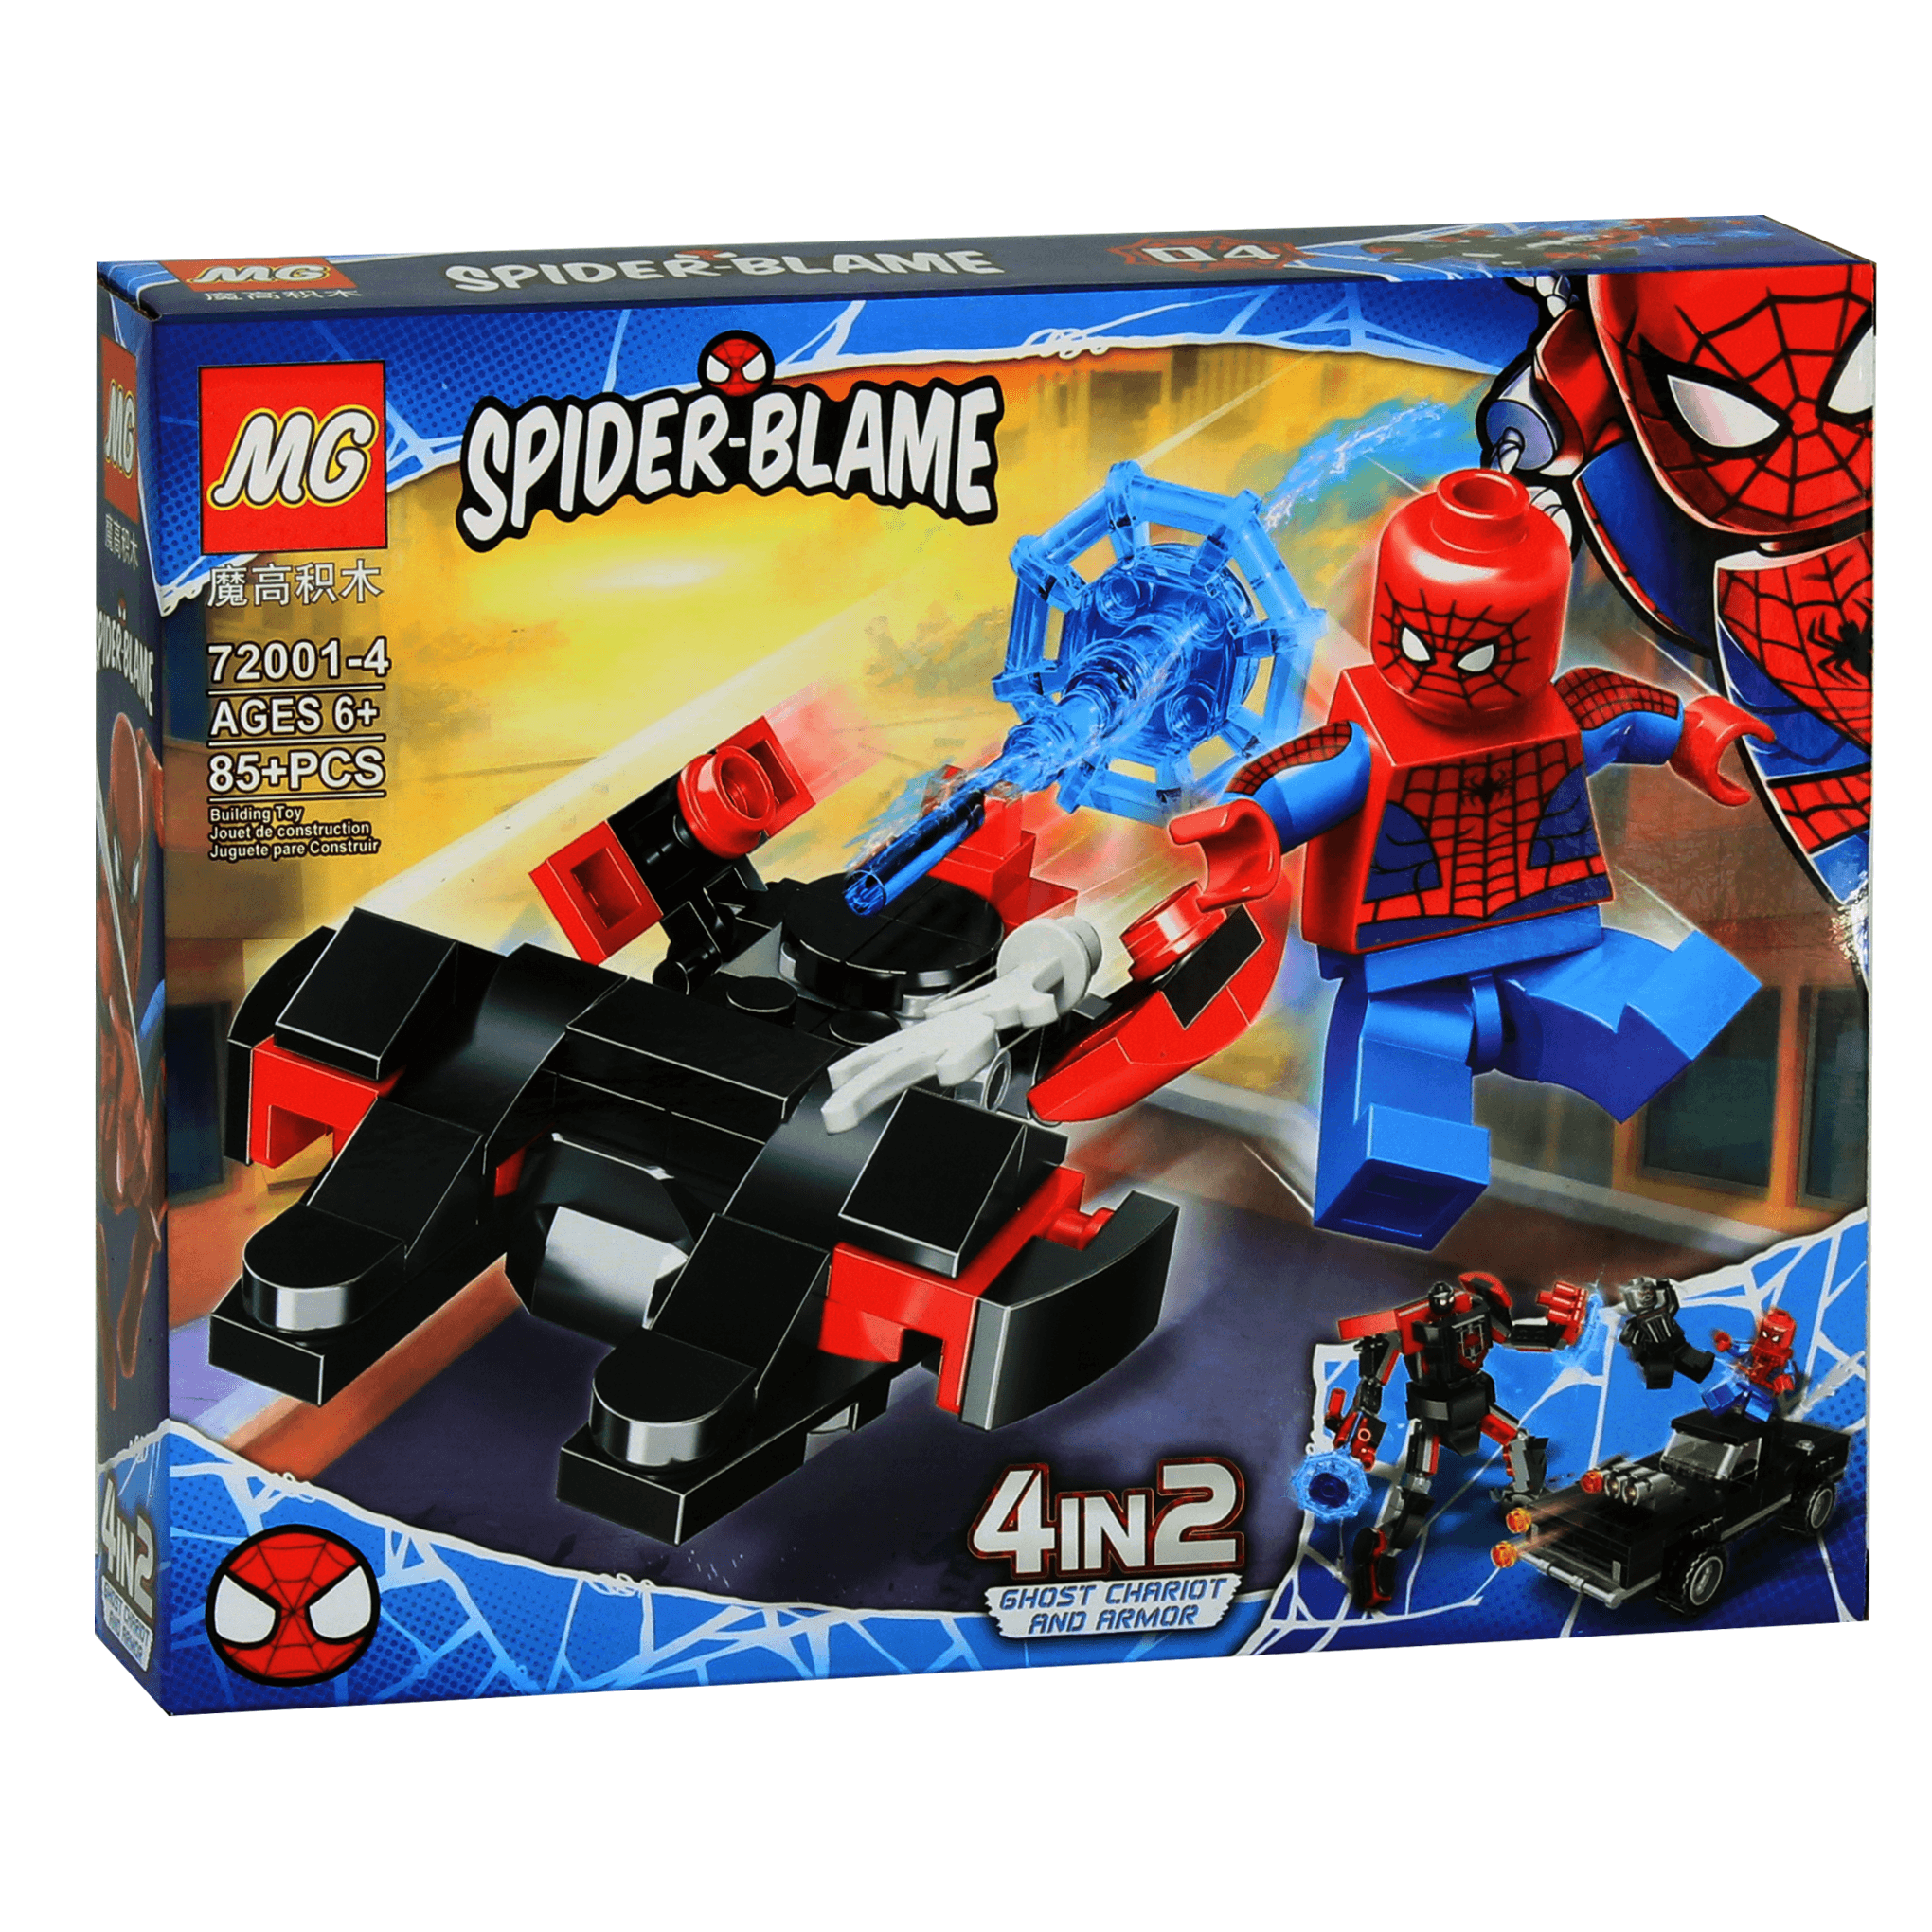 Spider-Blame 72001-4 Building Blocks 85 Pcs 4 In 1 - BumbleToys - 5-7 Years, Boys, Girls, LEGO, Toy Land